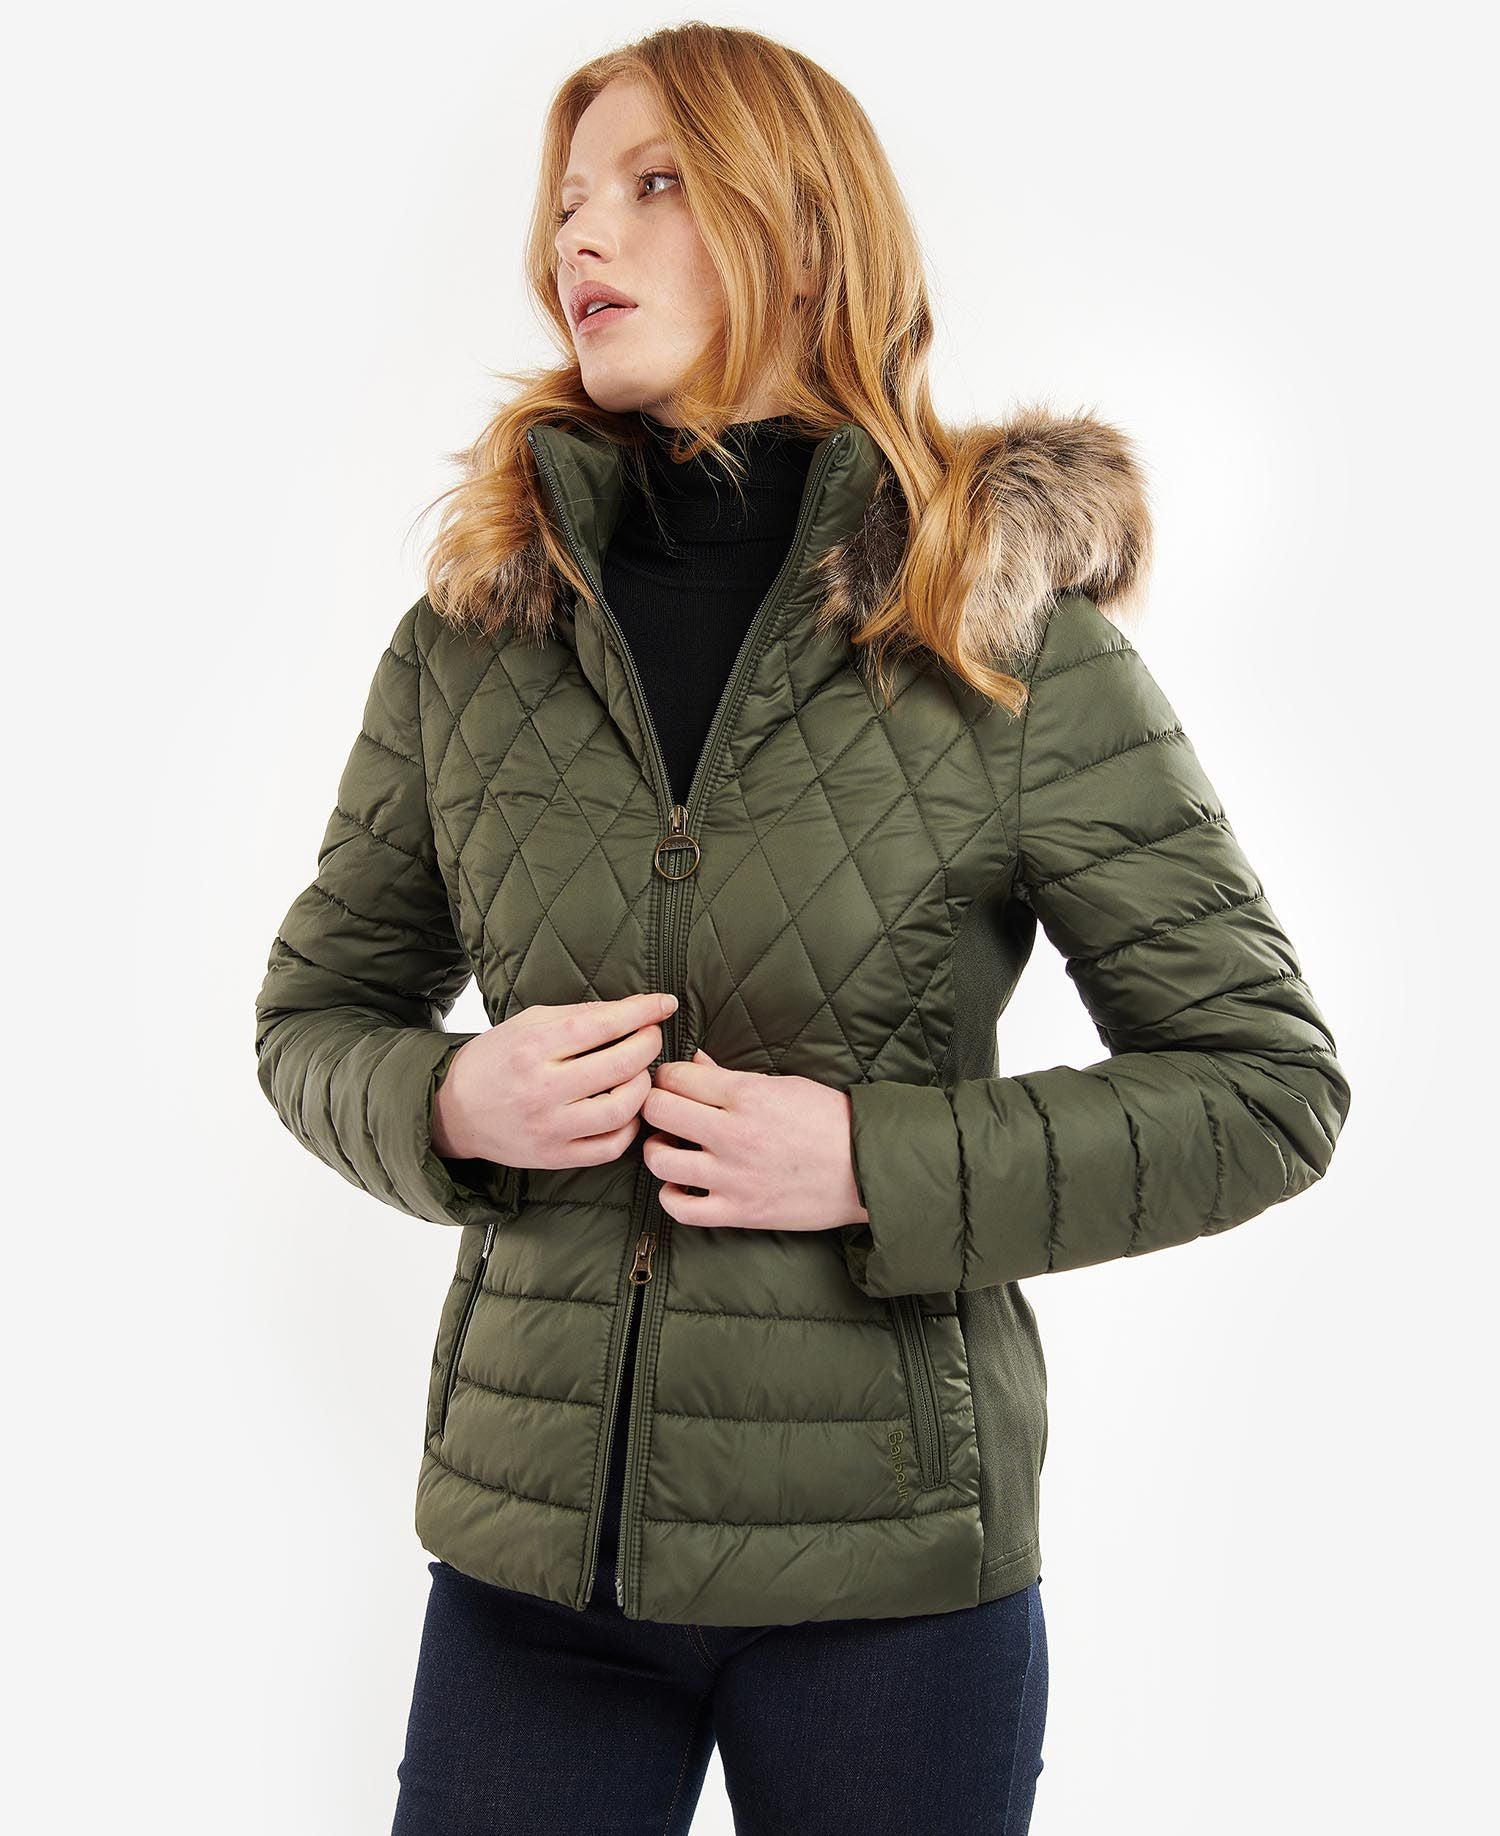 Mallow Quilted Jacket - Olive